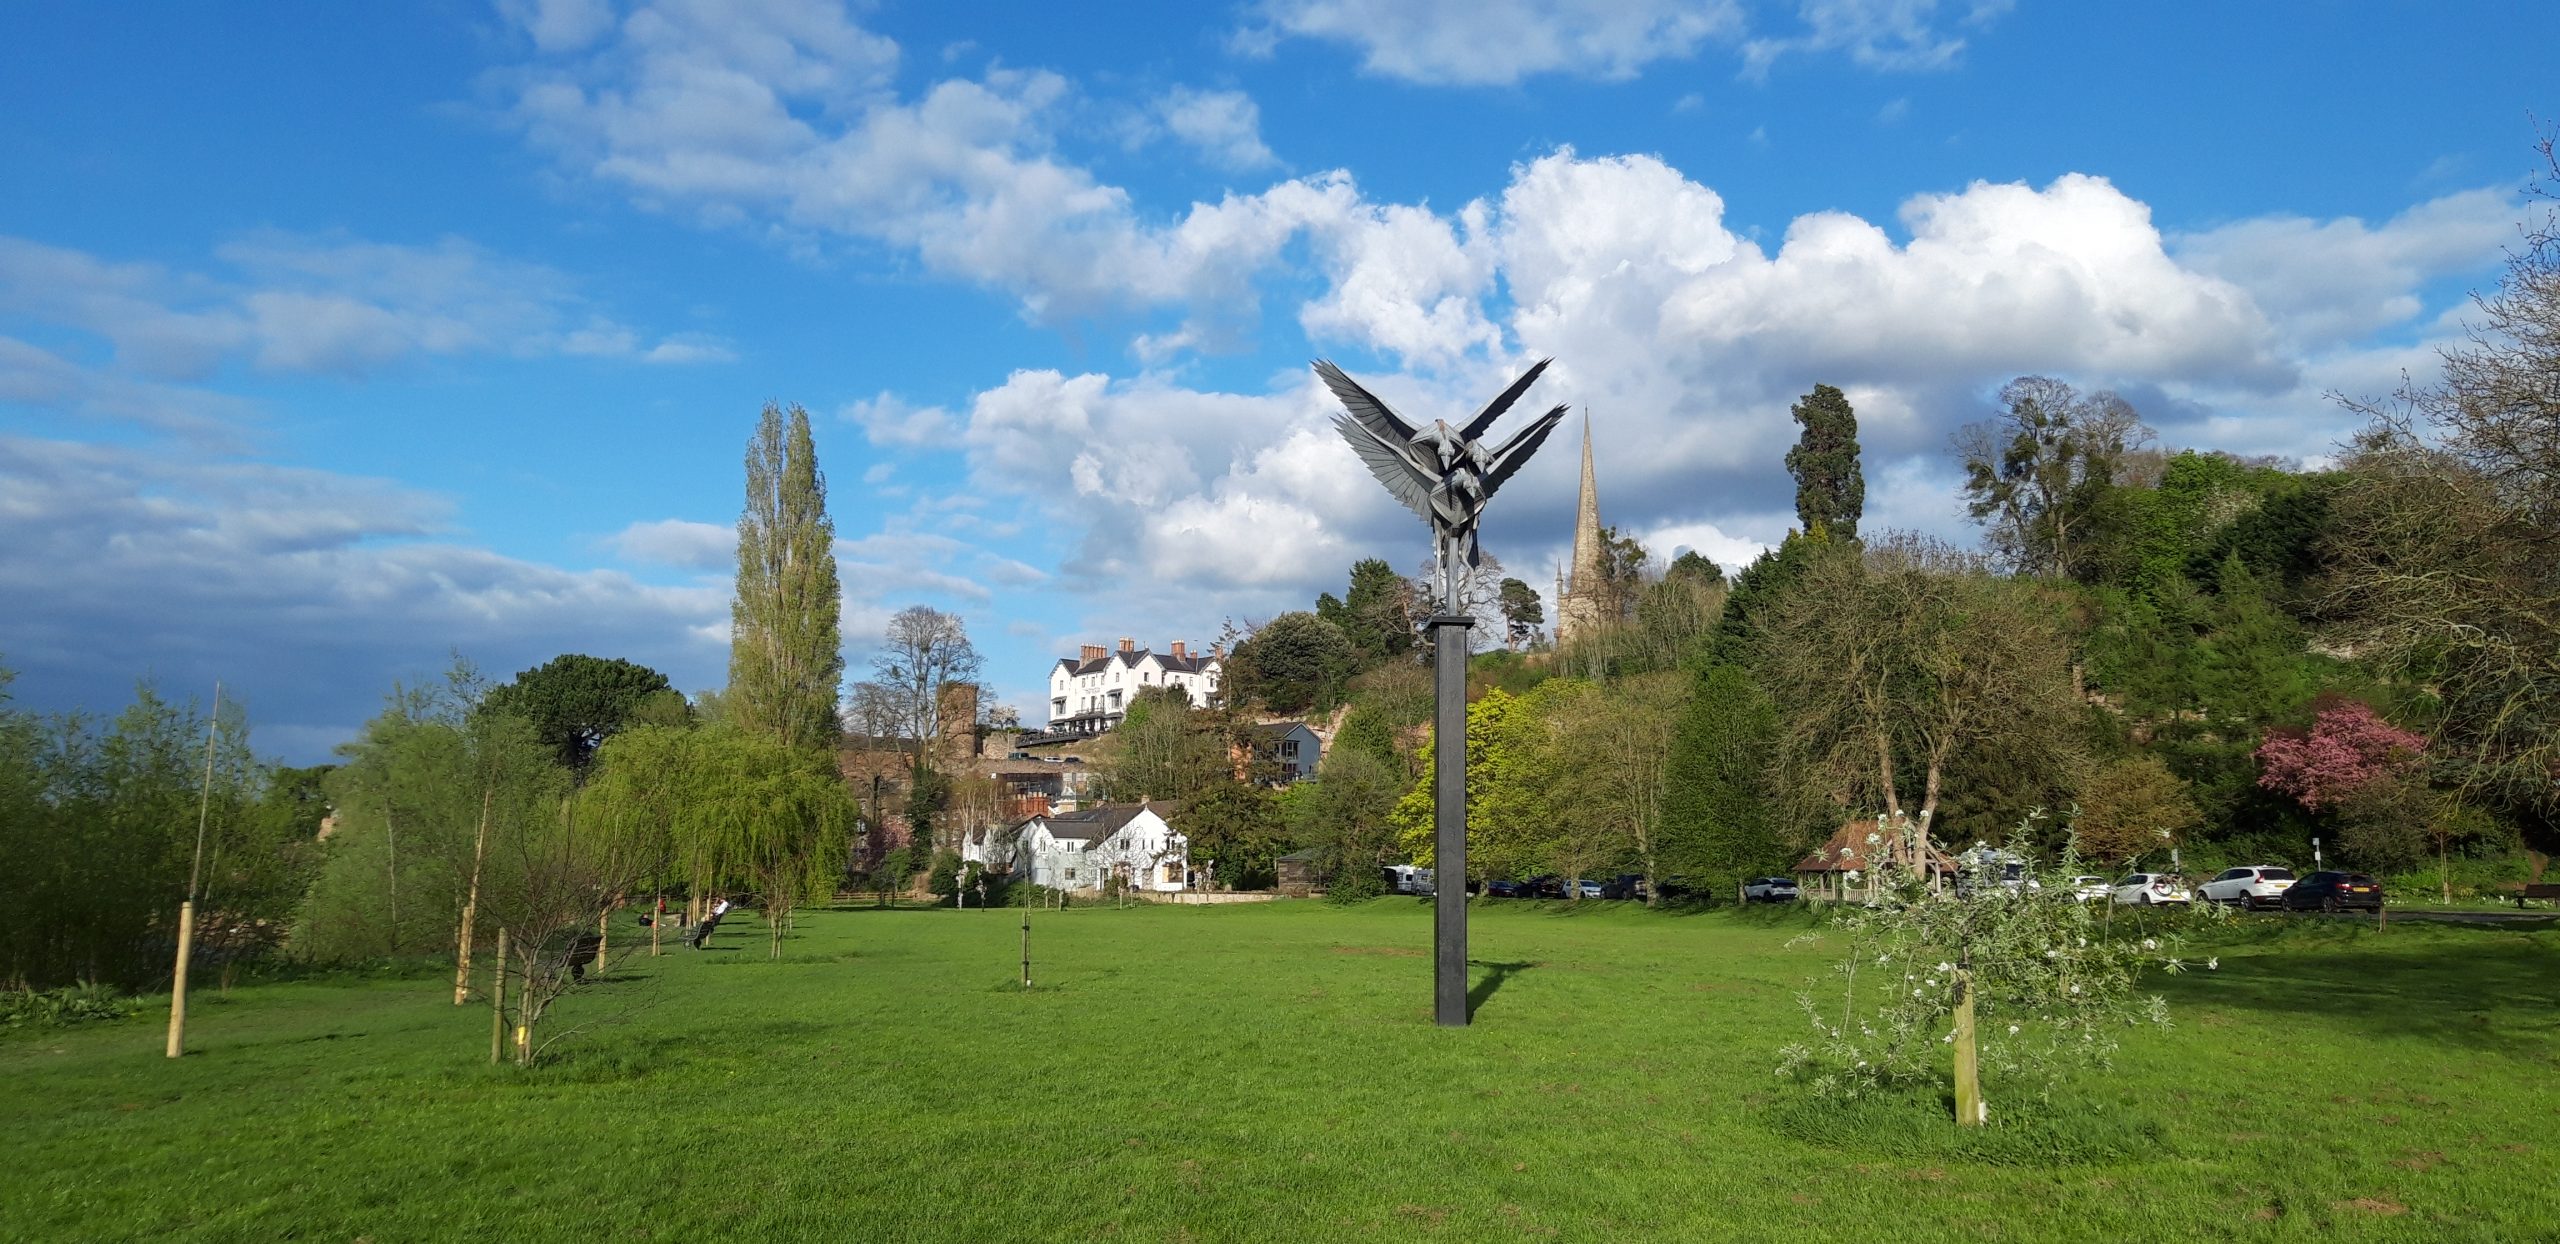 Long Acre meadow with Walenty Pytel metal sculptures